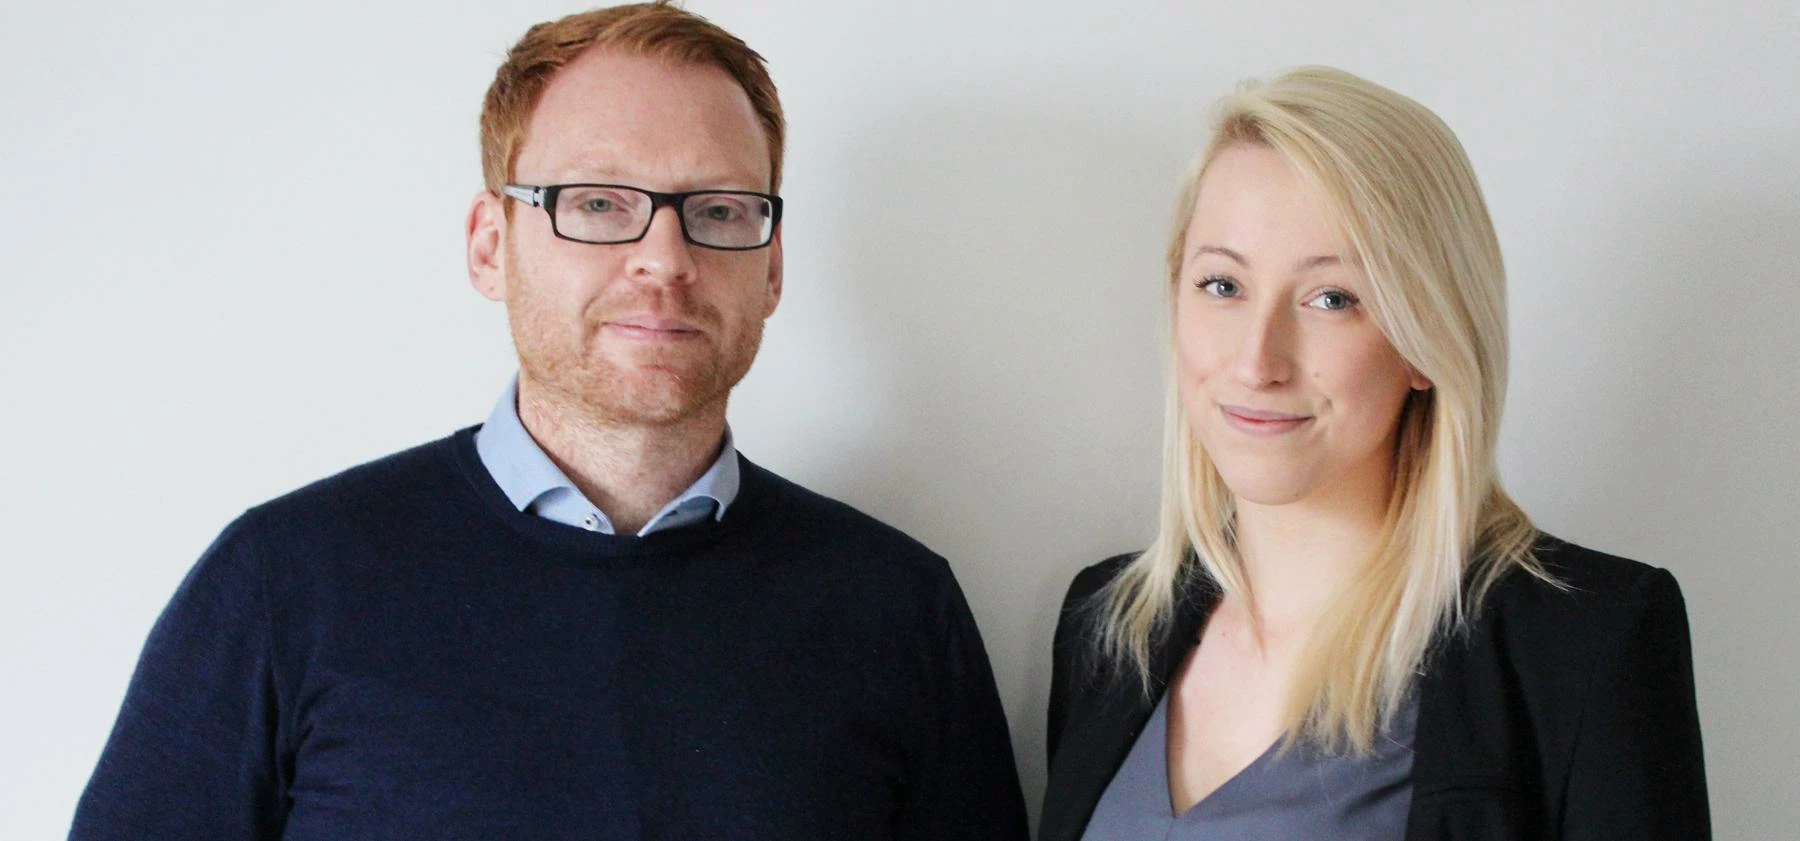 TTE Managing Director, Mark Bowles, welcomes Millie Stockwell to the team